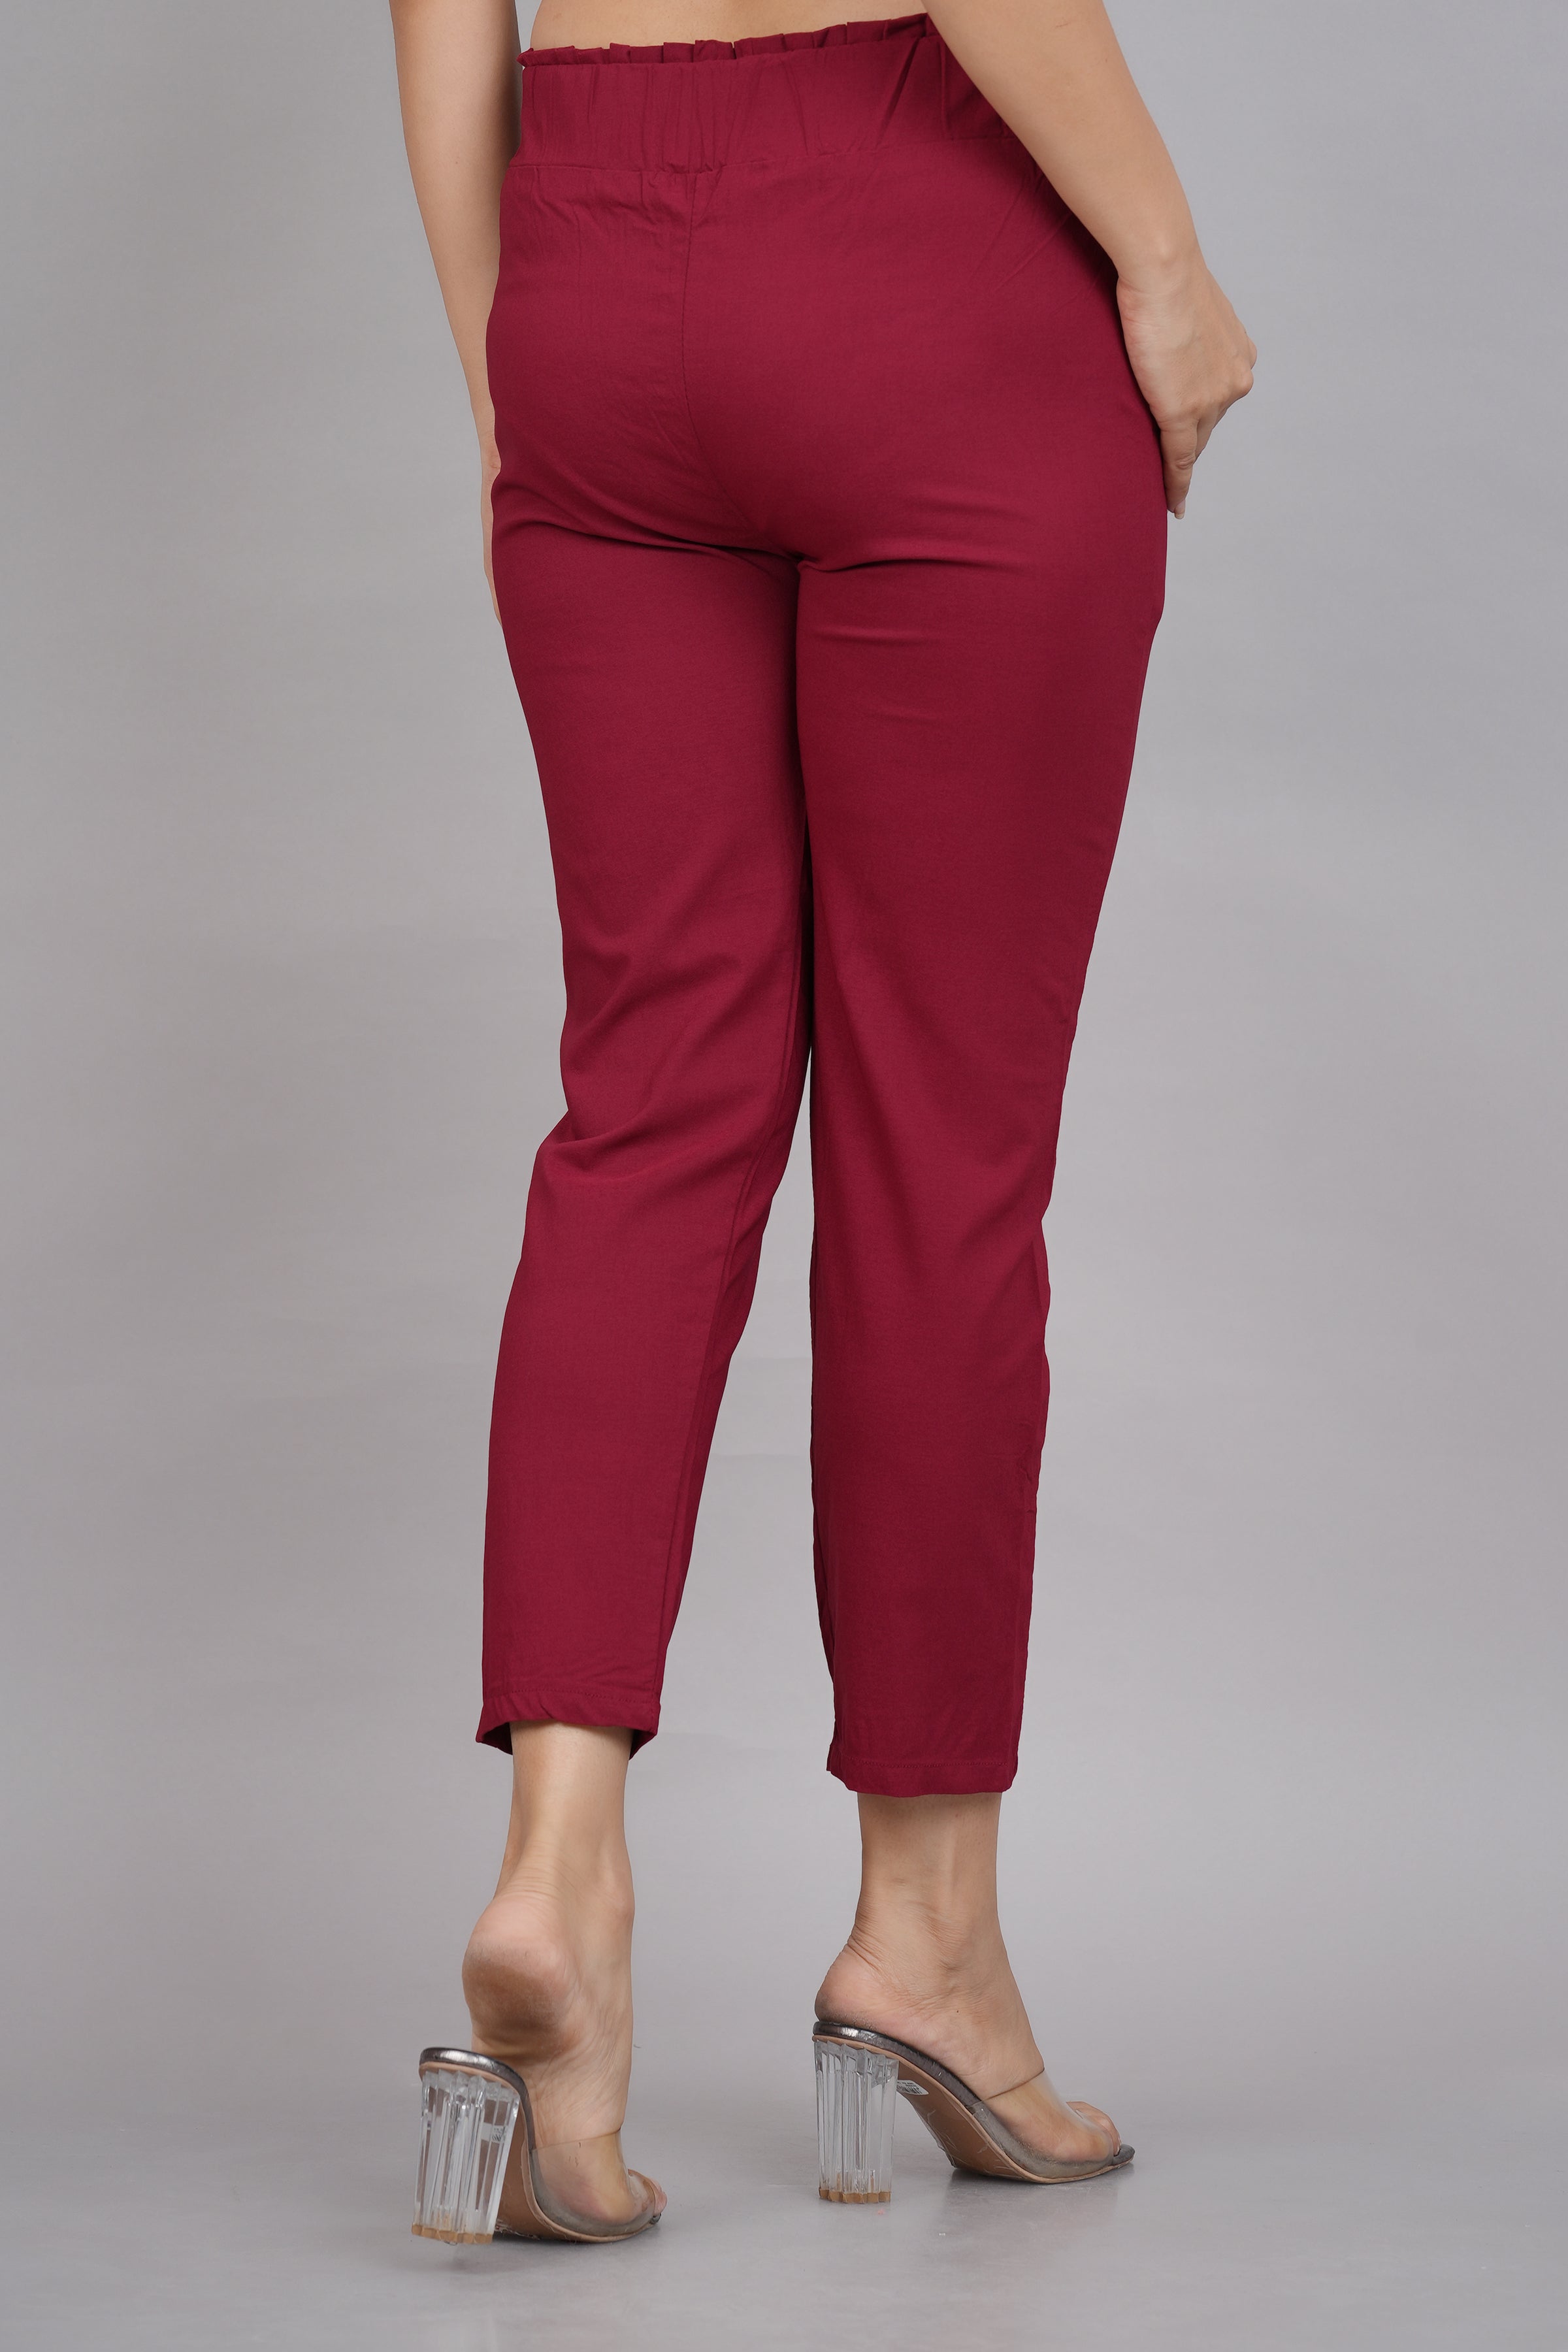 The Best Women's Stretchy Dress Pants That Don't Look Like Pull-Ons |  HuffPost Life